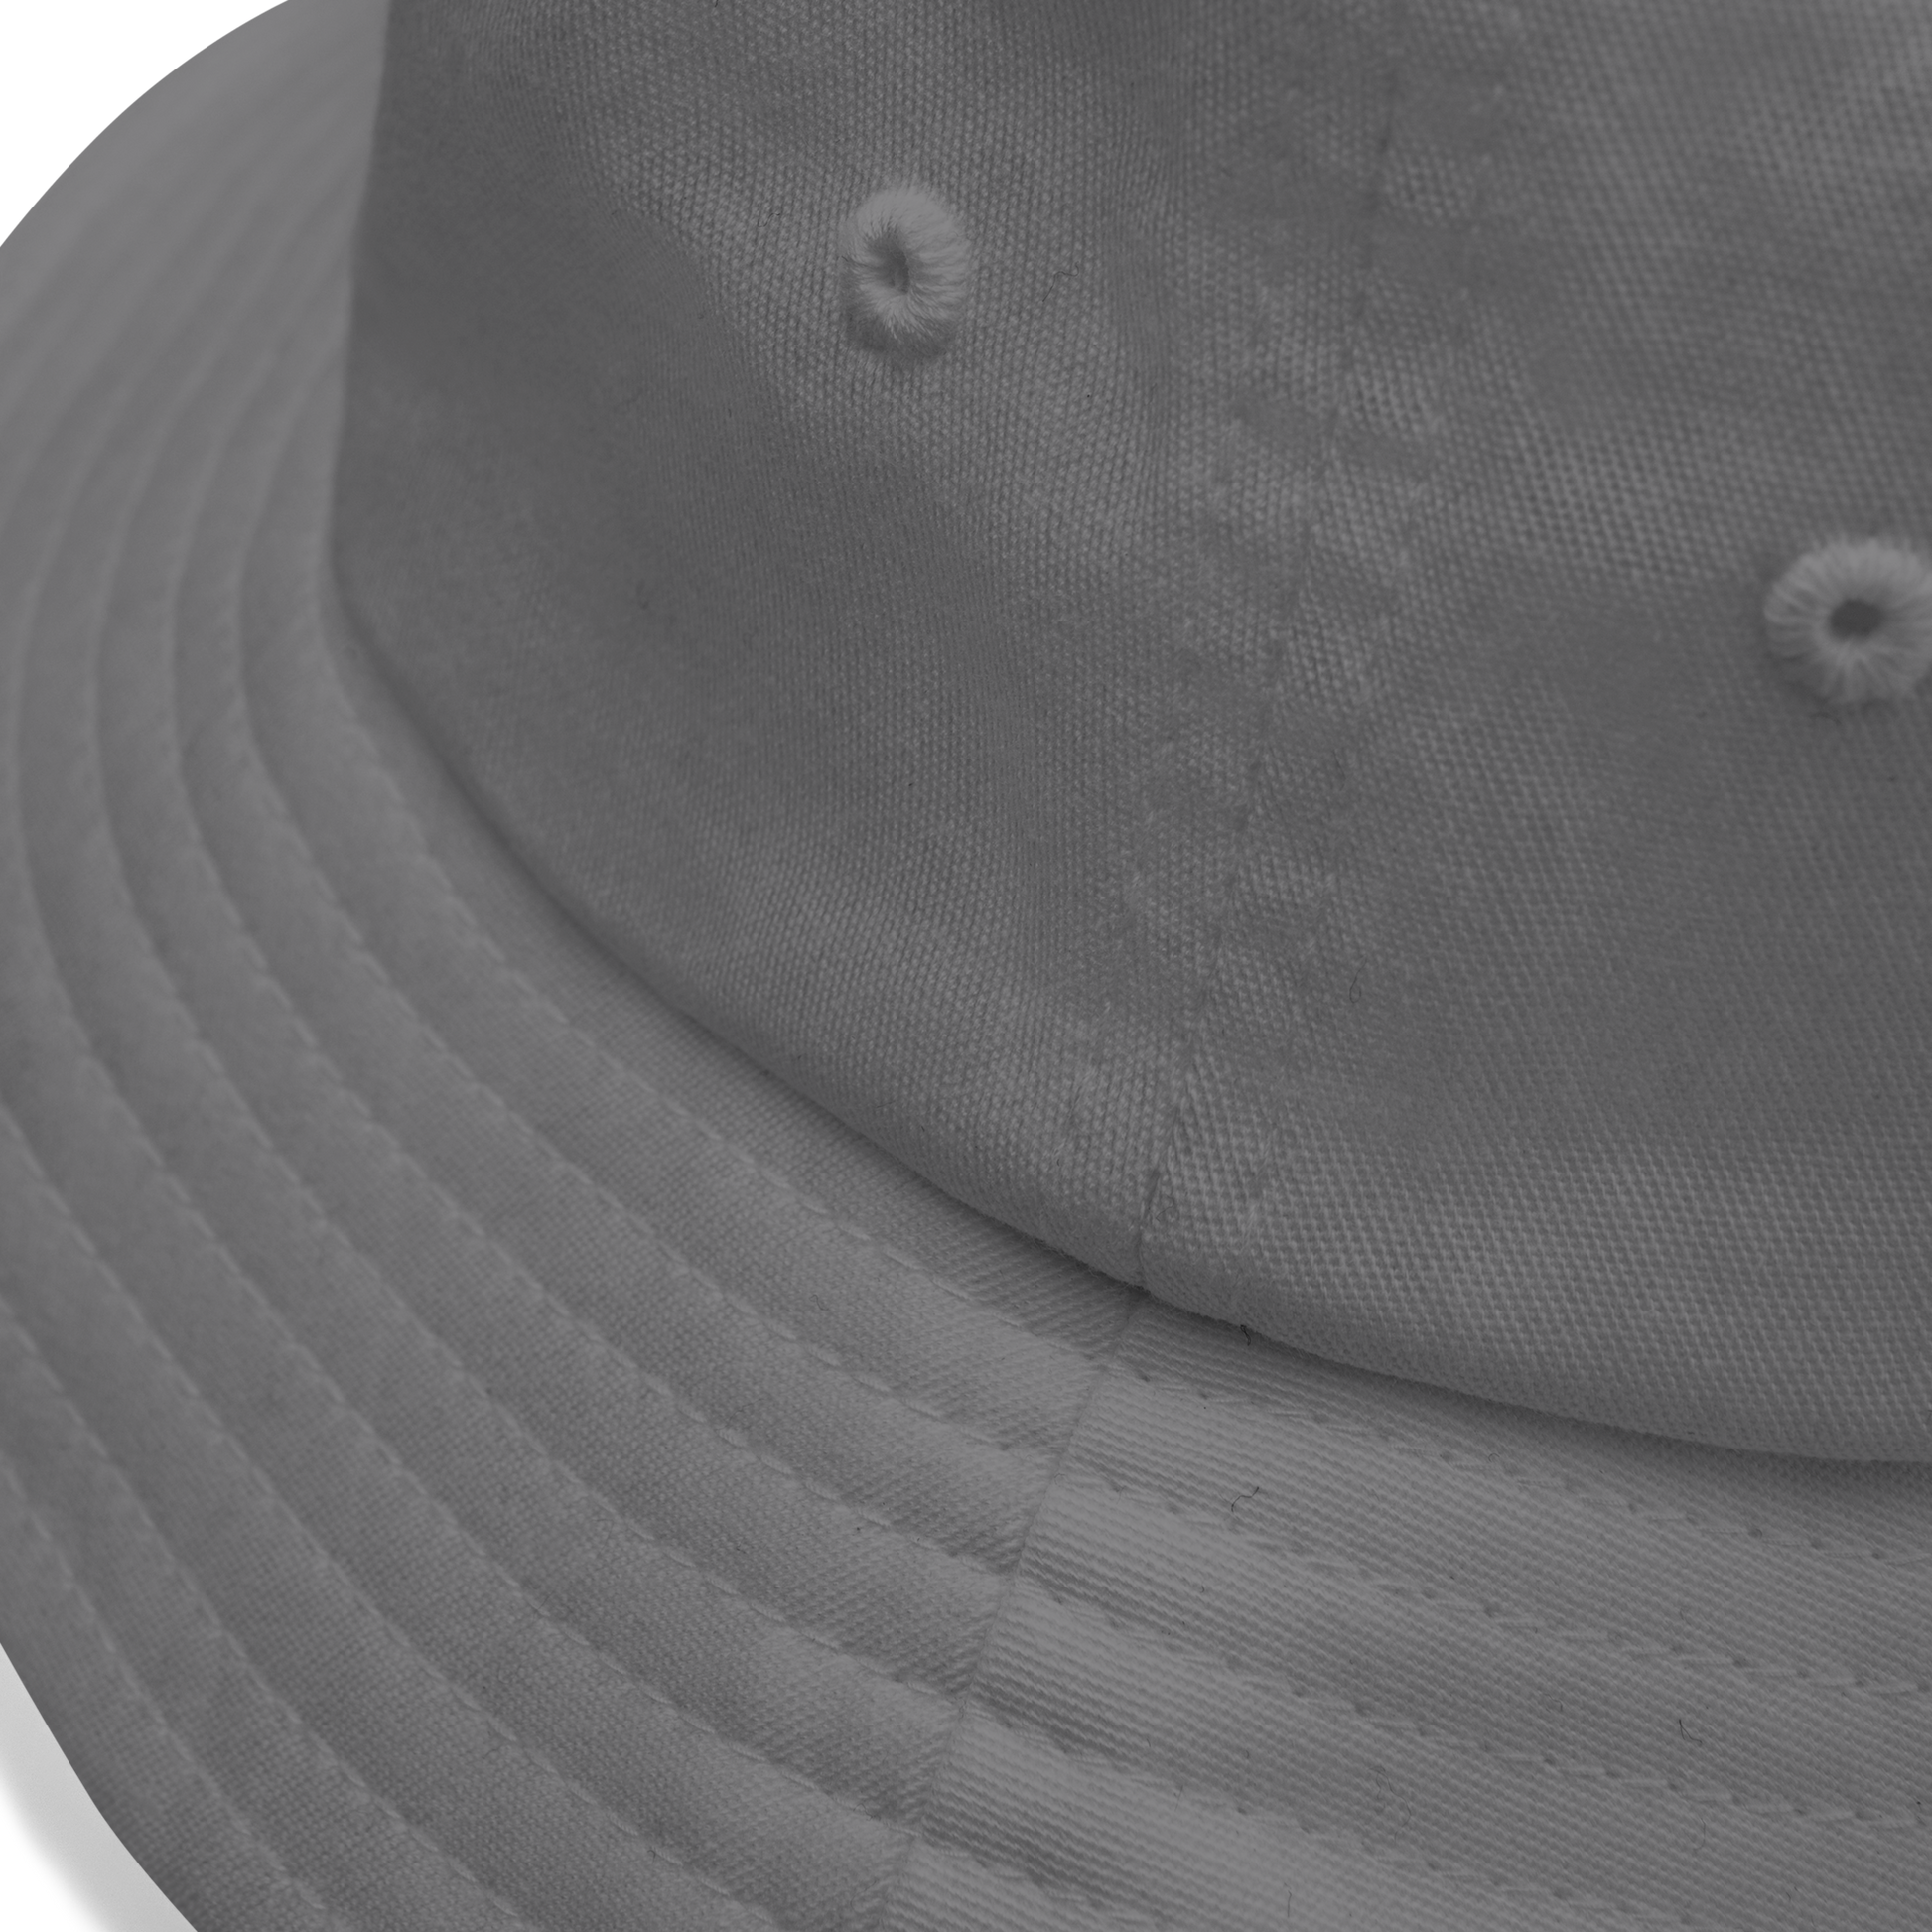 Product details of a Cool Grey Bucket Hat featuring a striking embroidered Boozy Fox logo on front. Shop Cool Sun Protection Bucket Hats And Wide Brim Hats Online - Boozy Fox